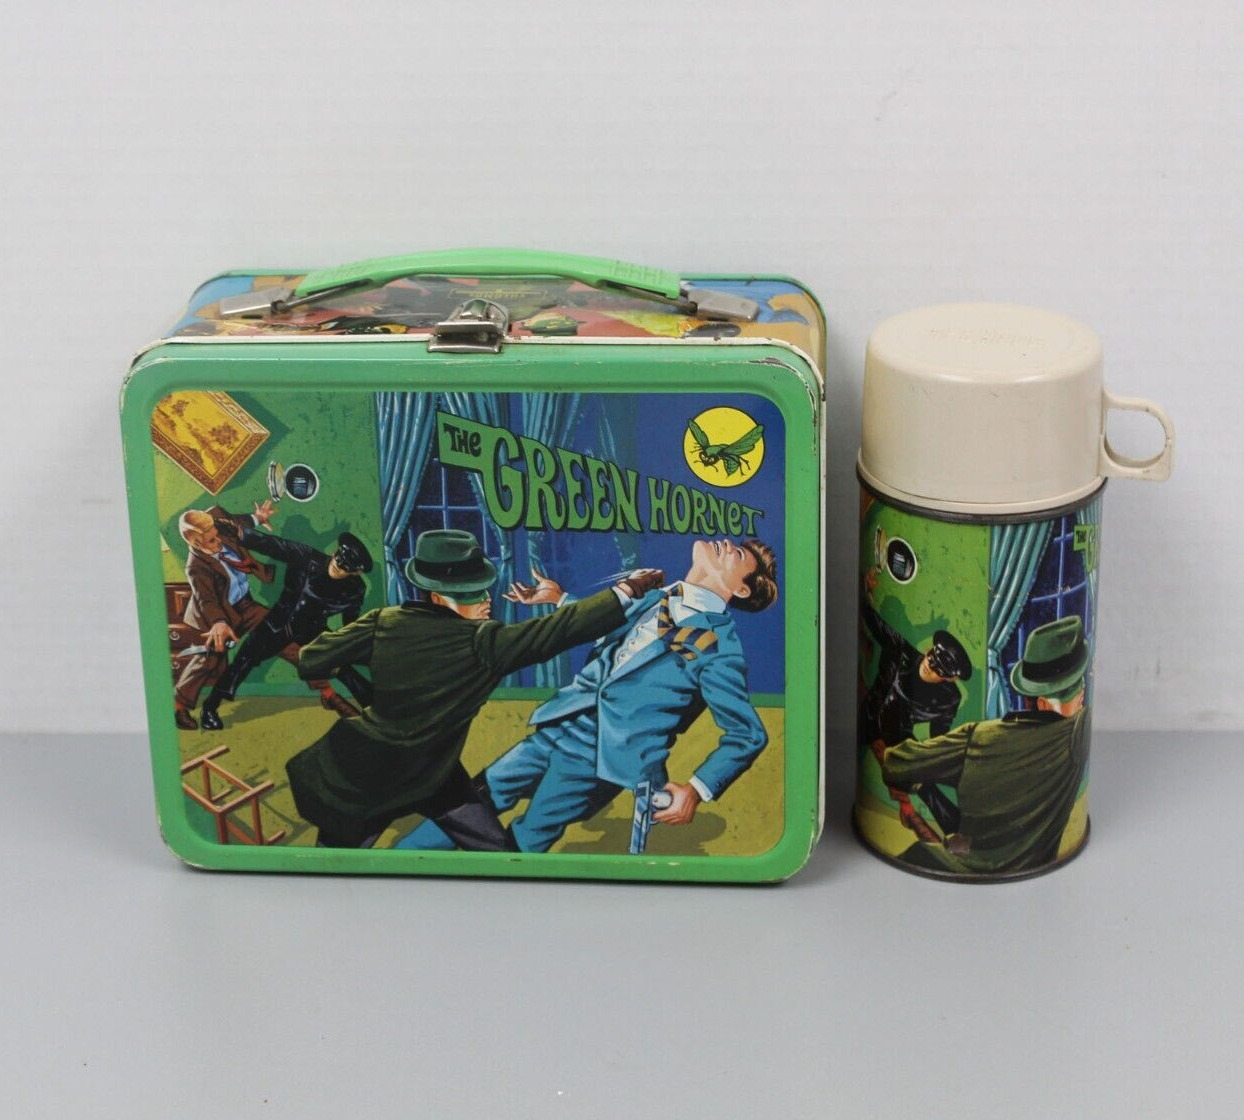 Vintage 1967 The Green Hornet Metal Lunchbox - King Seeley - with Thermos